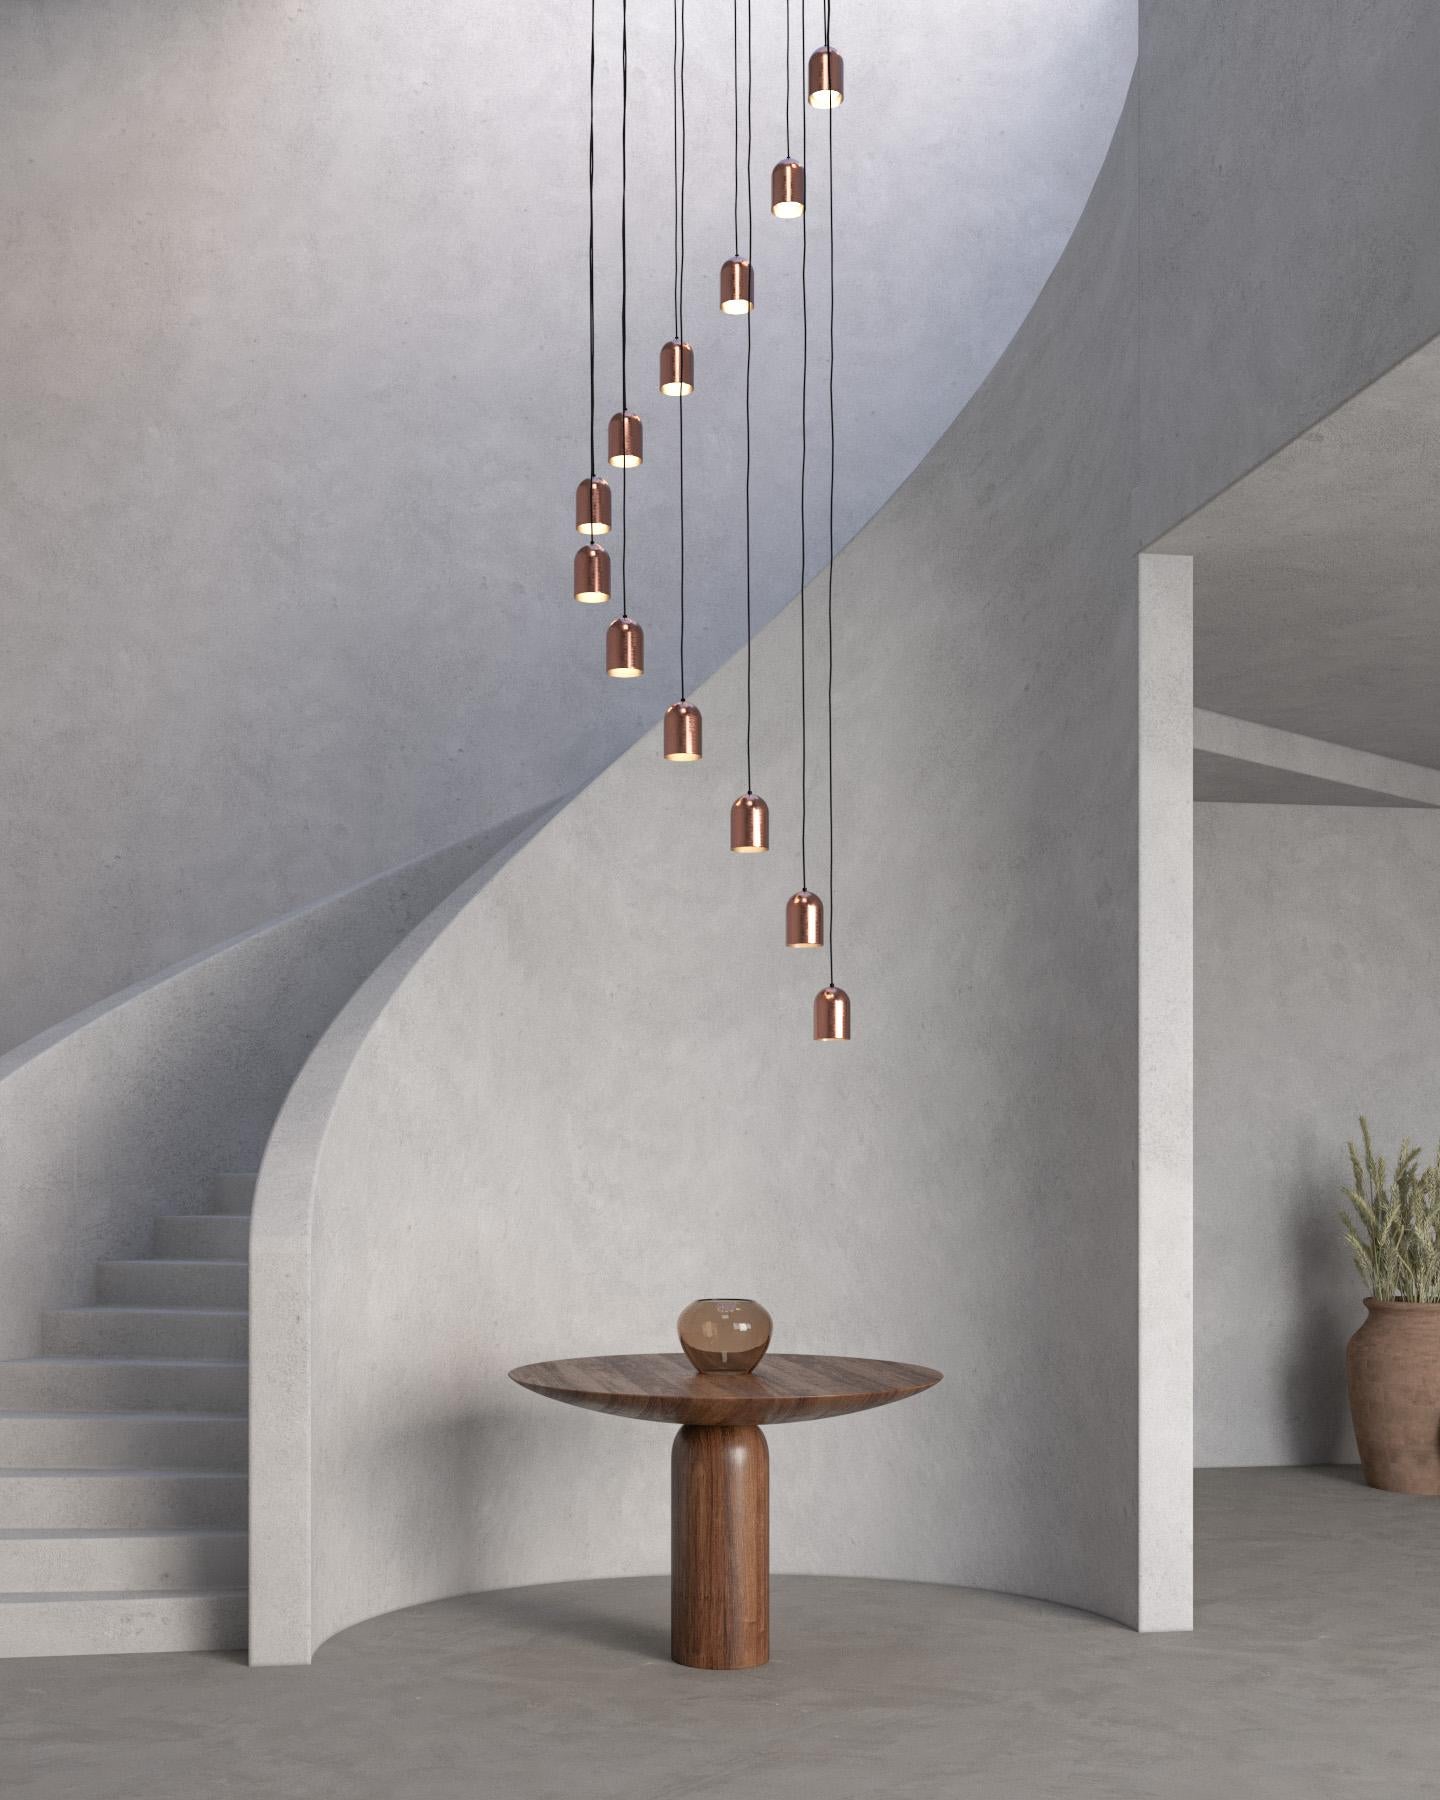 From the inspiration and exploration of geometry, materials and processes, this pendant lamp maintains a simple design, which can be incorporated into any space in the most subtle way.

Iluminant: Incl. 6 W G9 LED 620 lm, 120 V ~ 60 Hz 0.04 A
3000 K